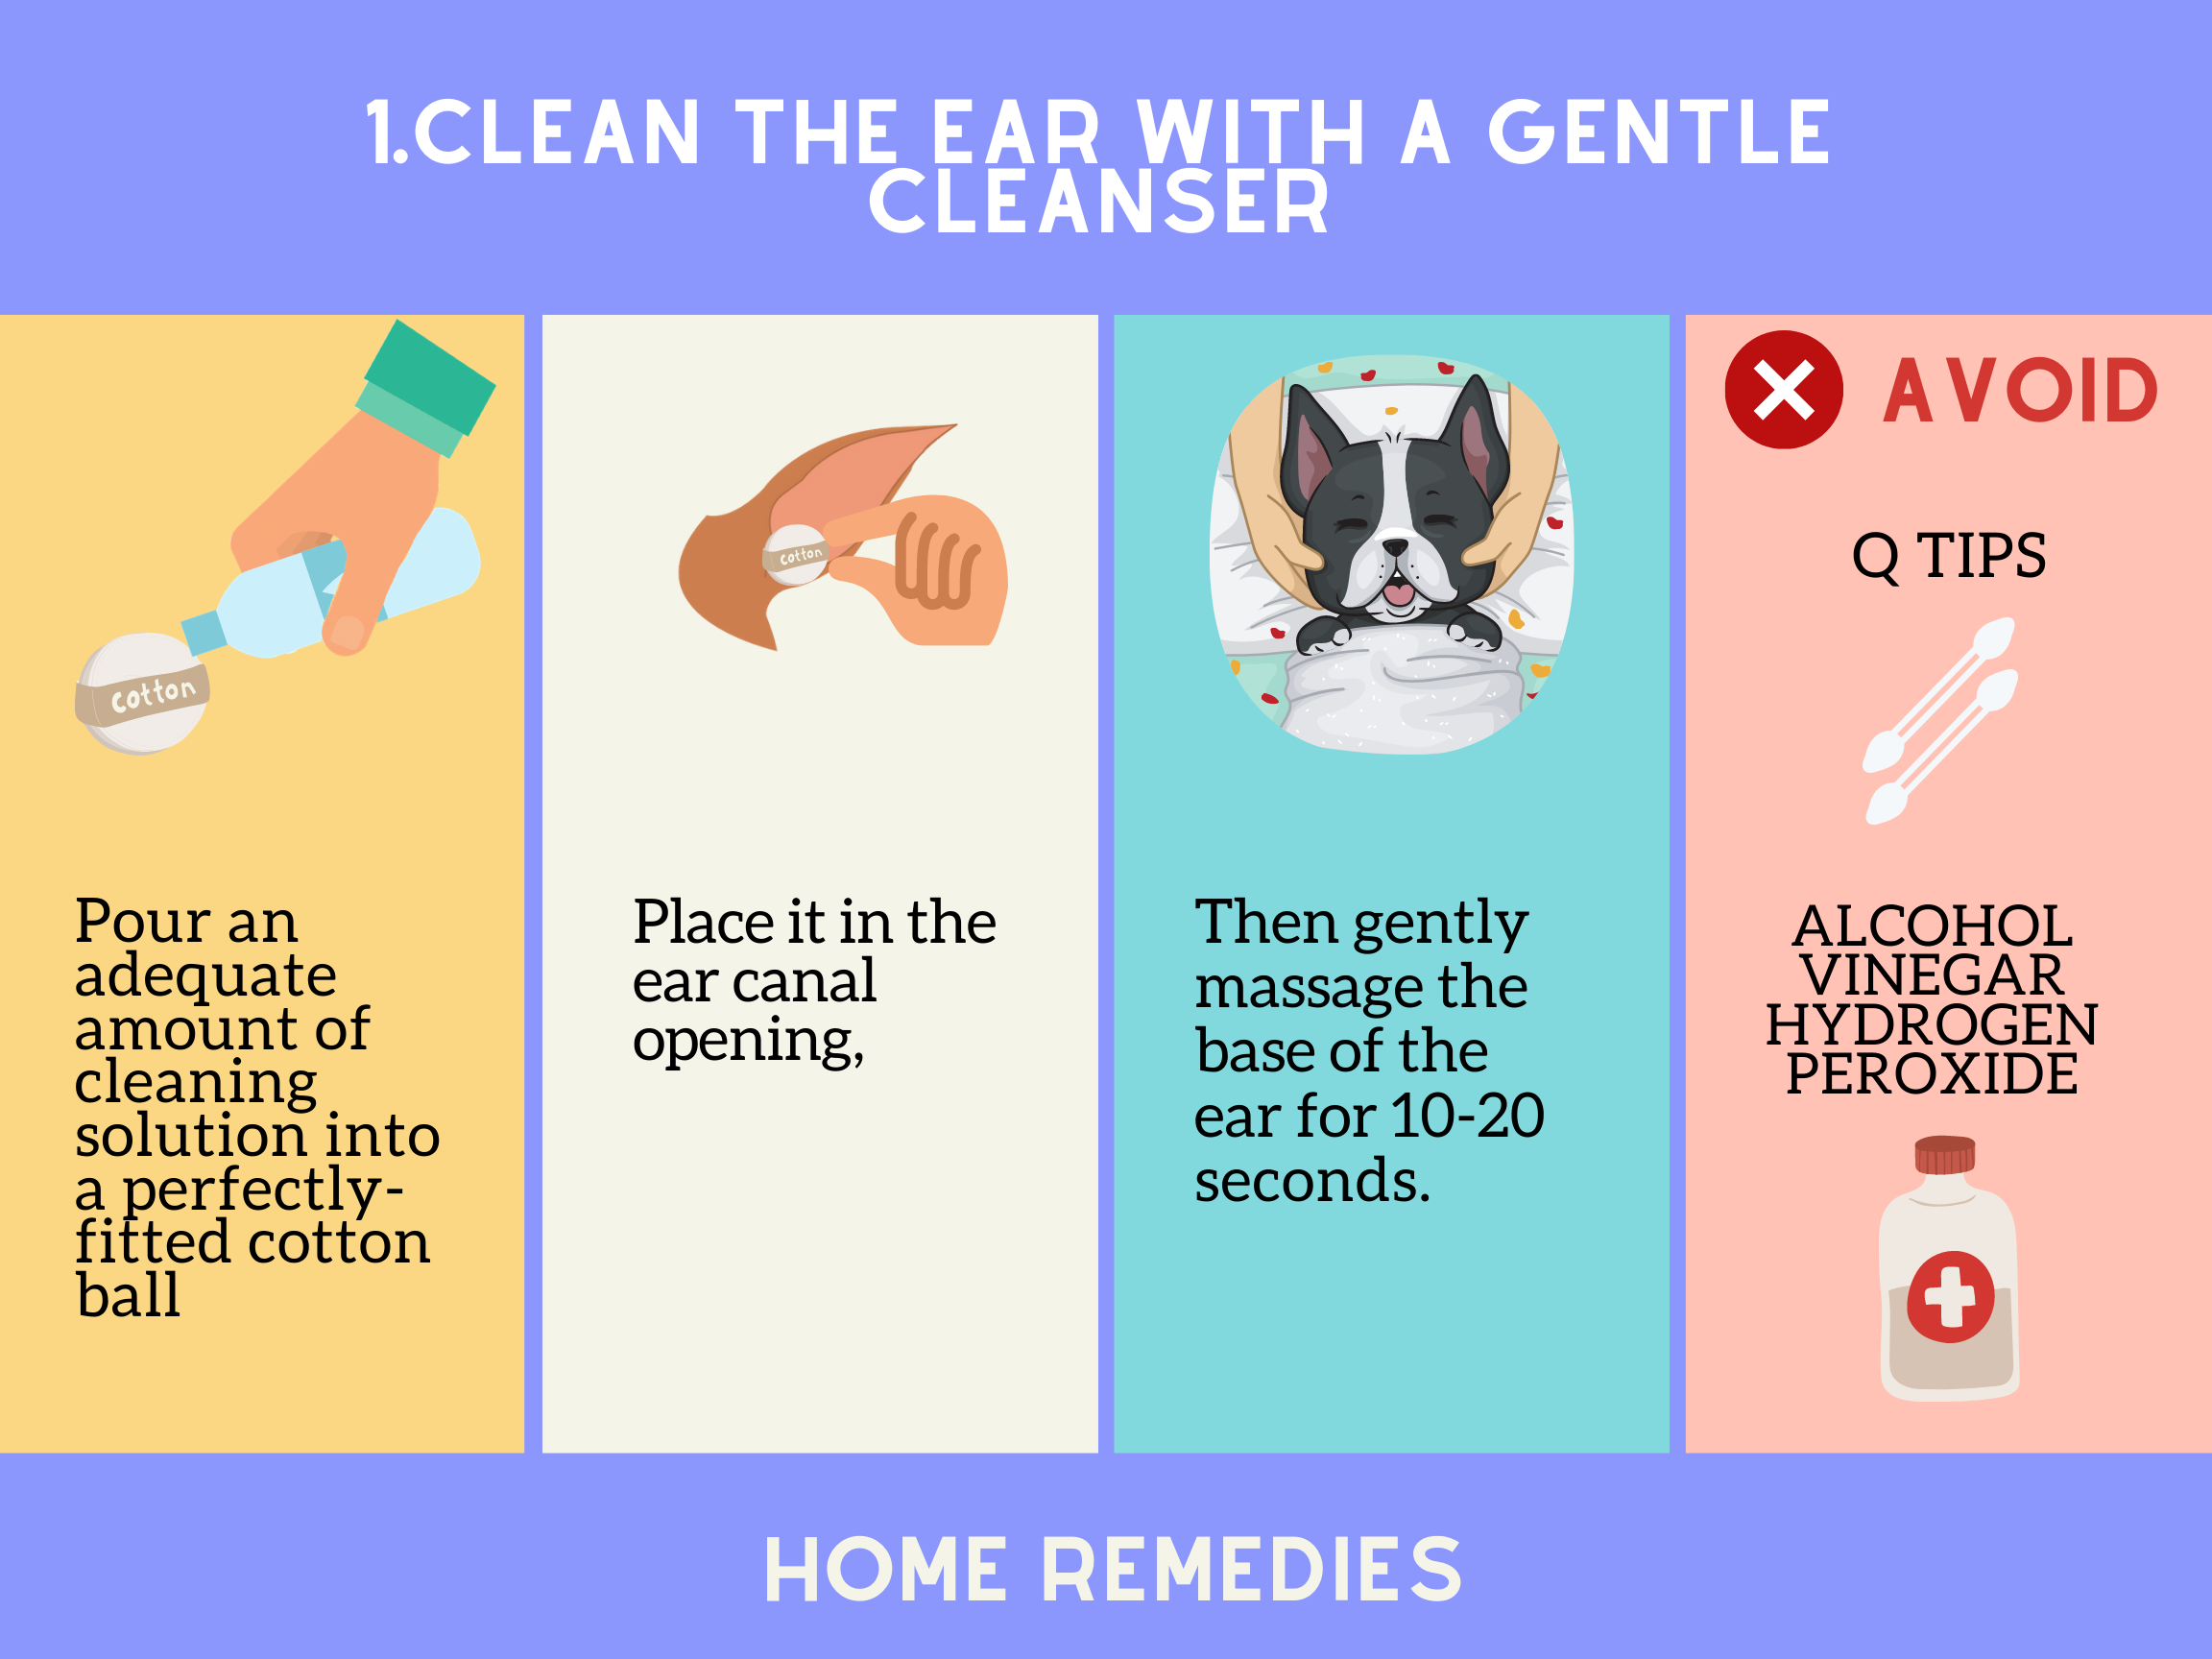 Clean the ear with cleanser bark for more